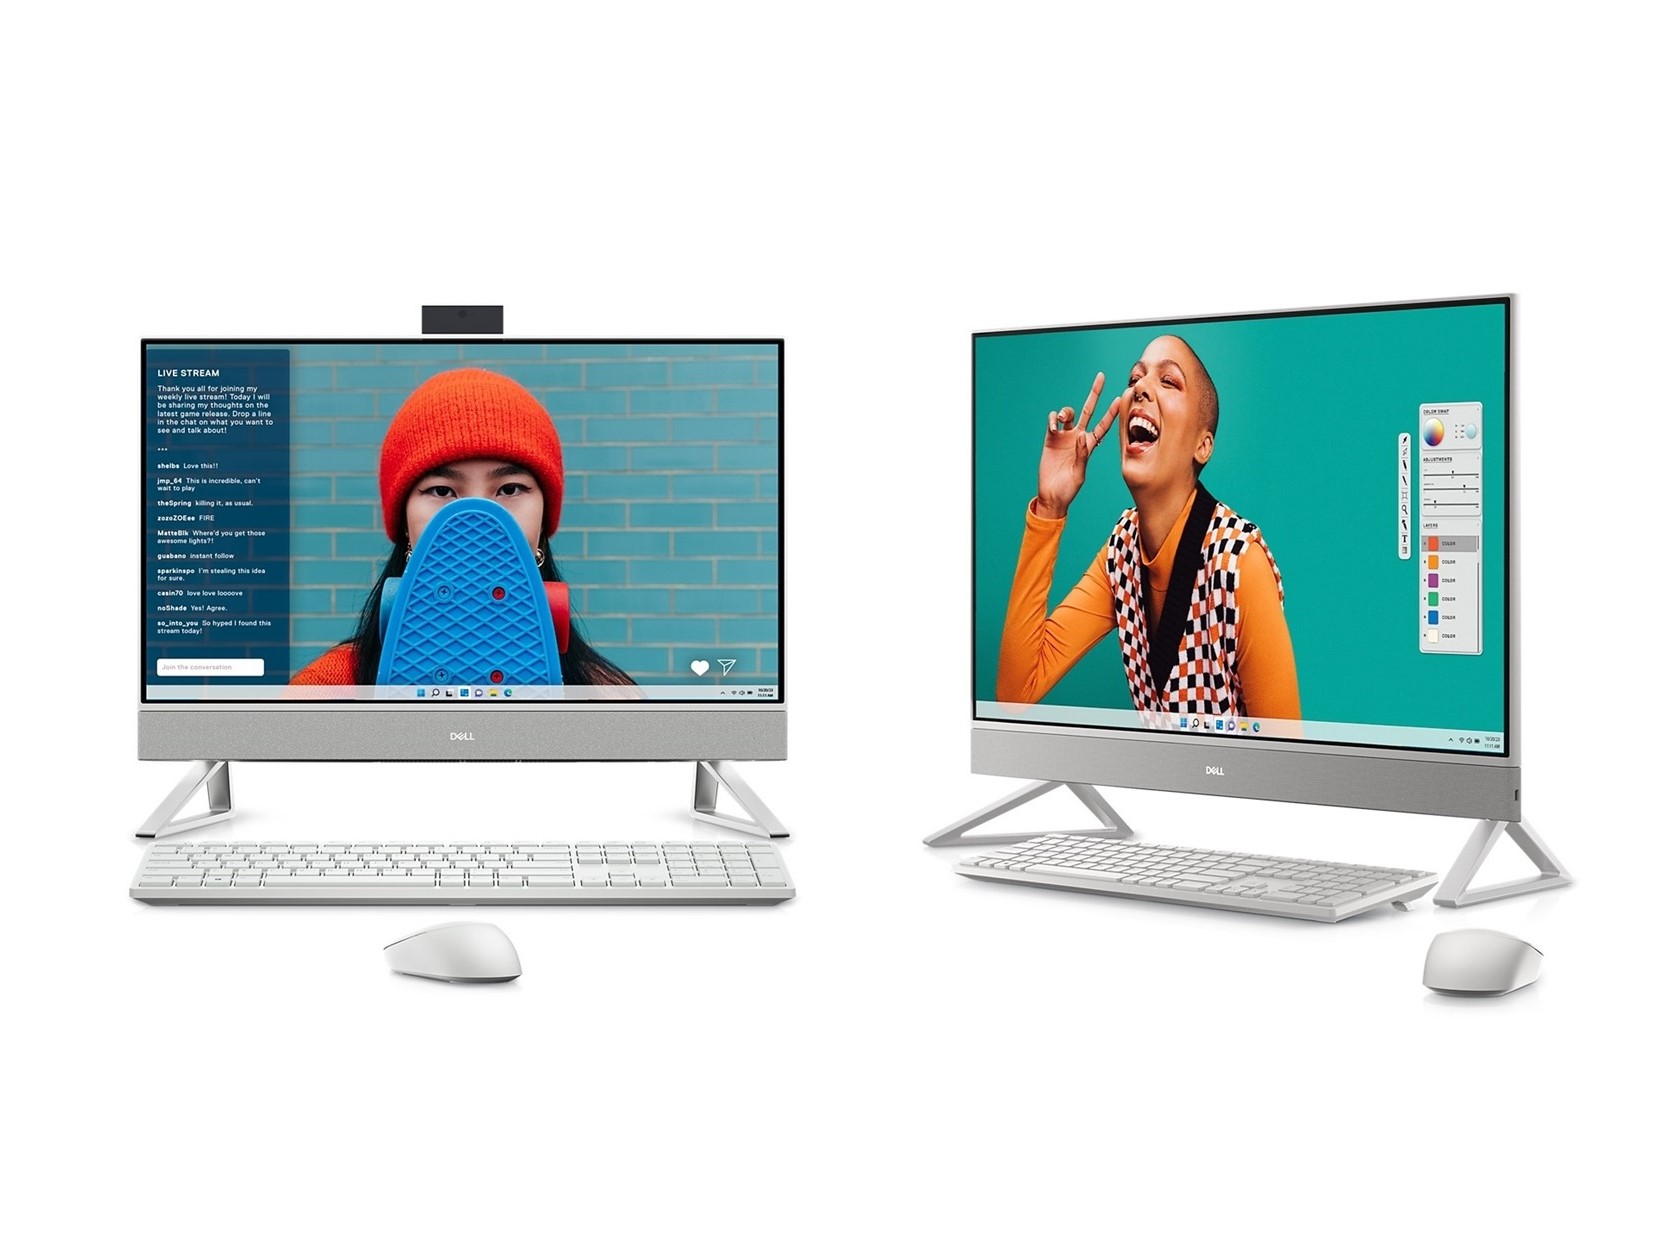 Two Dell Inspiron 27 All-in-One PCs side by side on a white background.